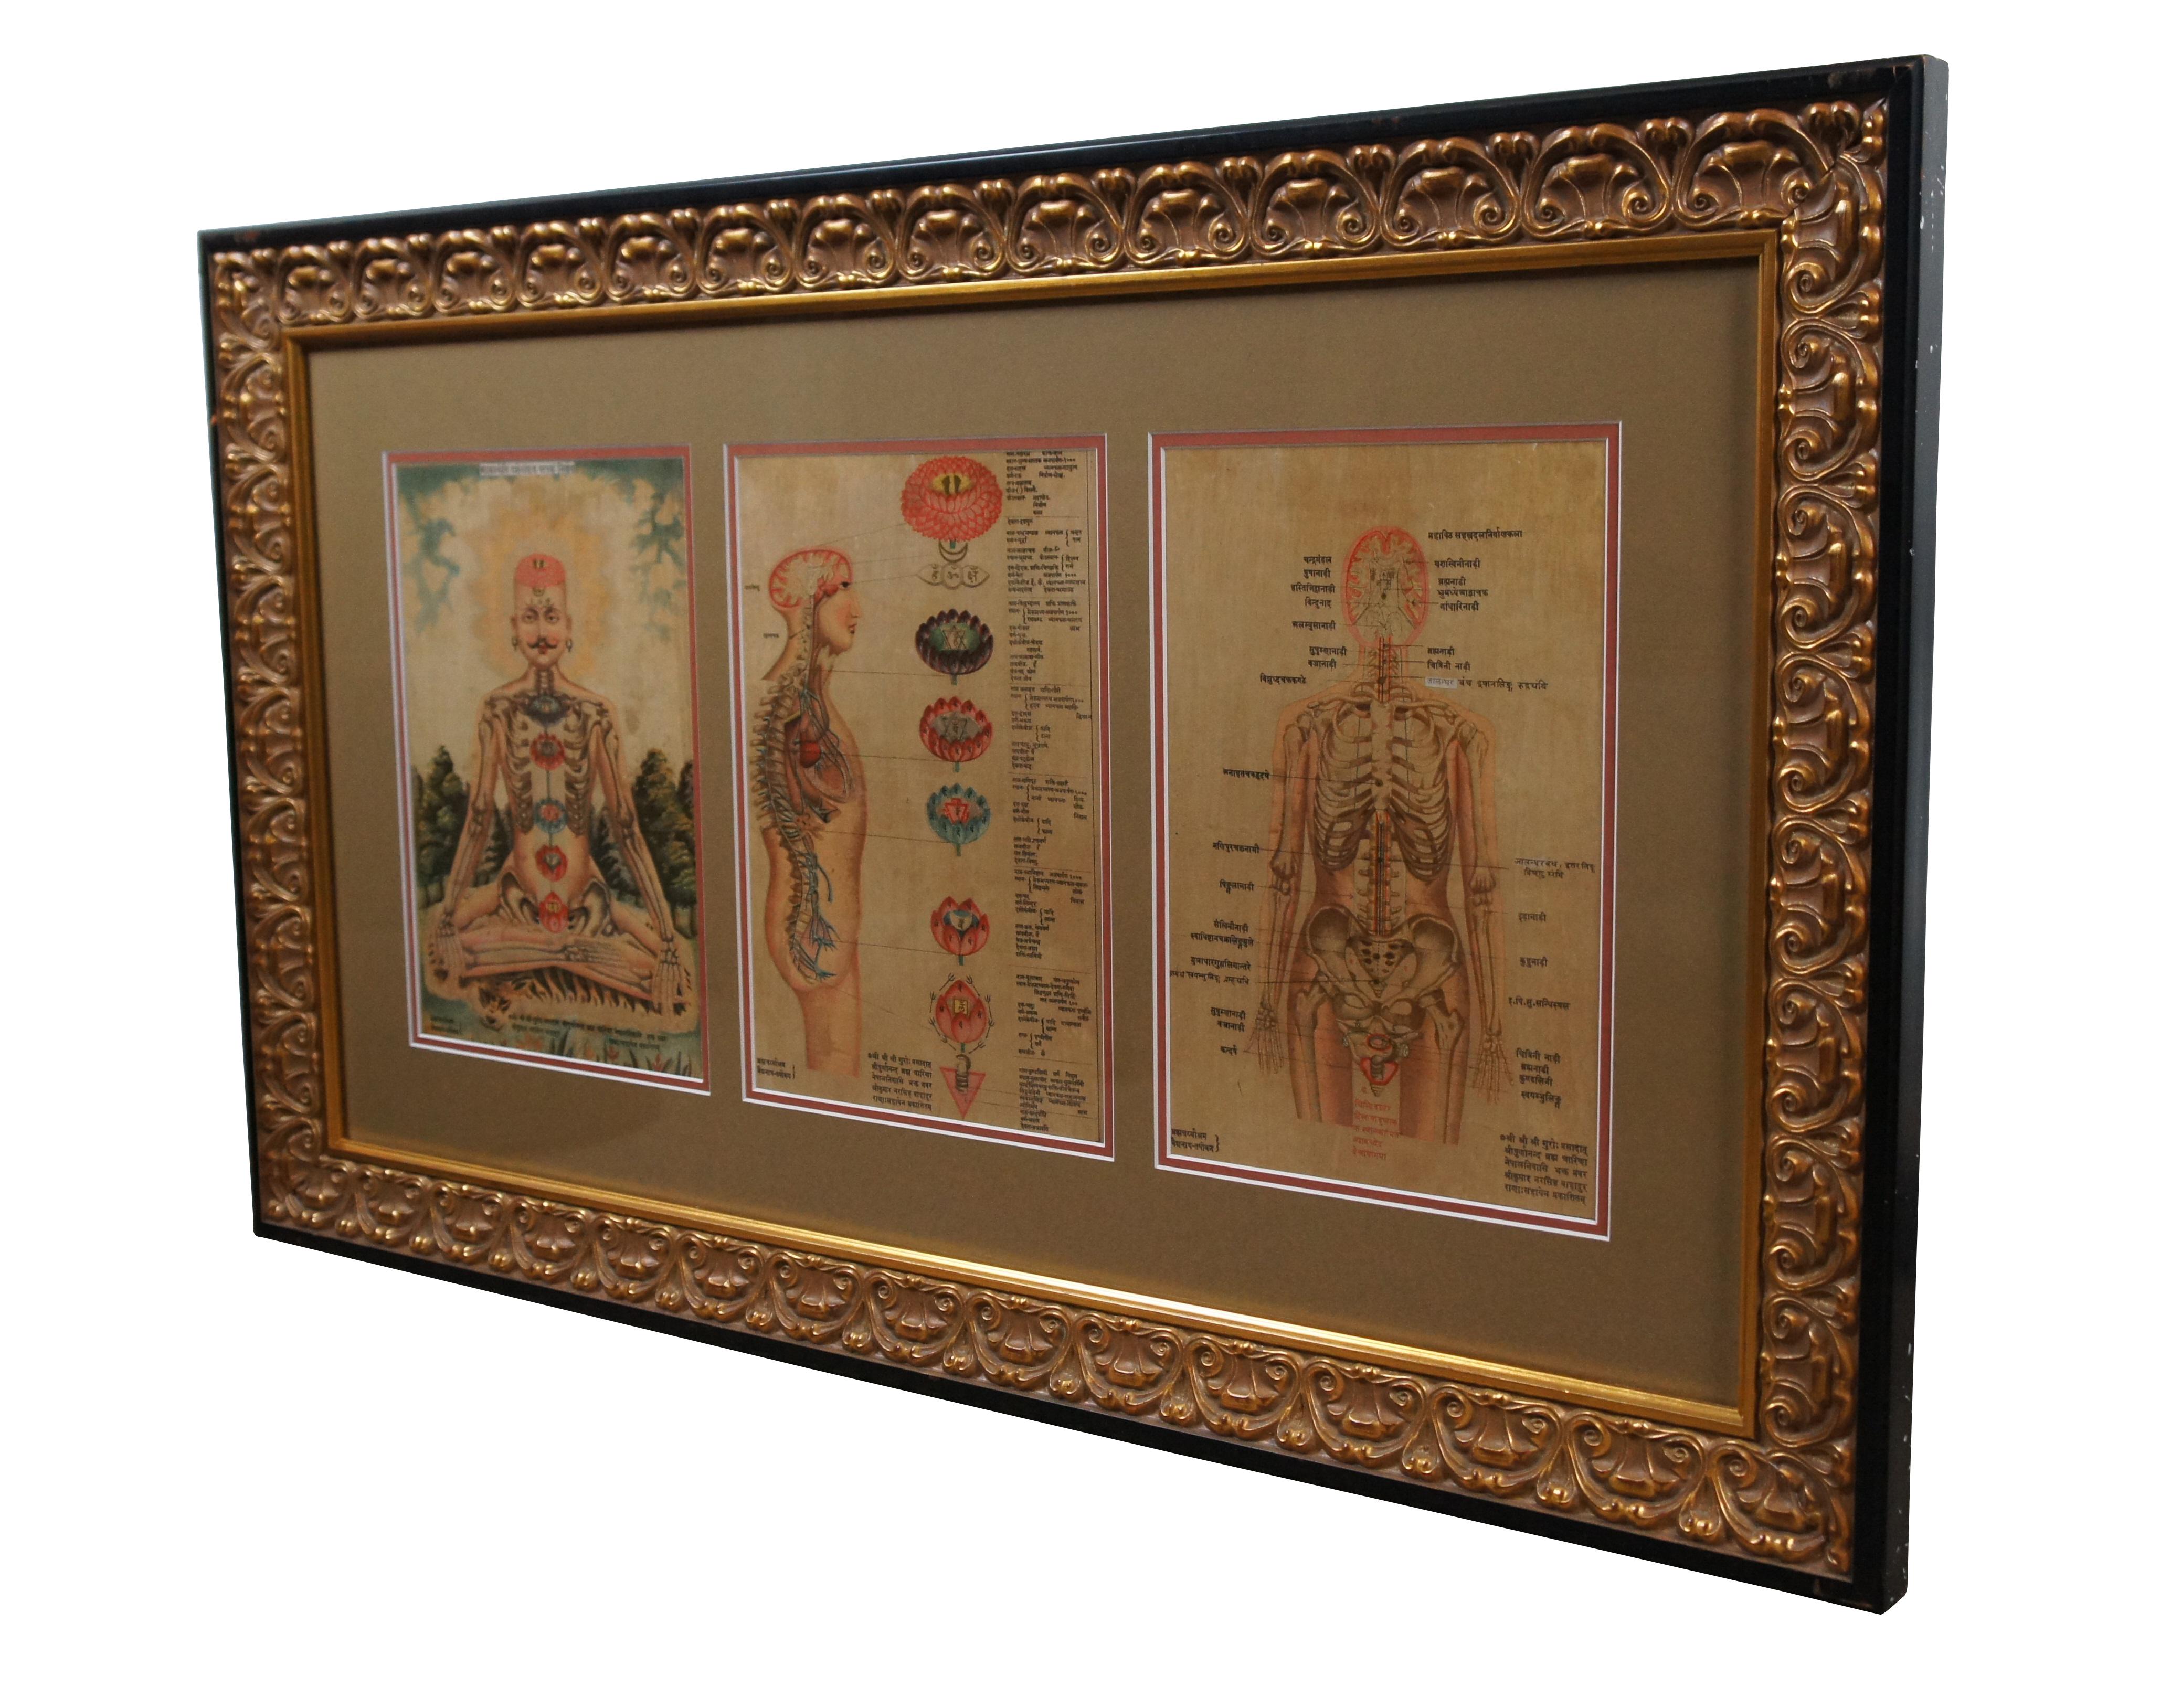 Set of three antique Hindu / Indian anatomical prints, emphasizing the seven chakras with Sanskrit text. Display together in a modern carved gilded yard-long frame with black edge.

“Chakras are various focal points used in a variety of ancient